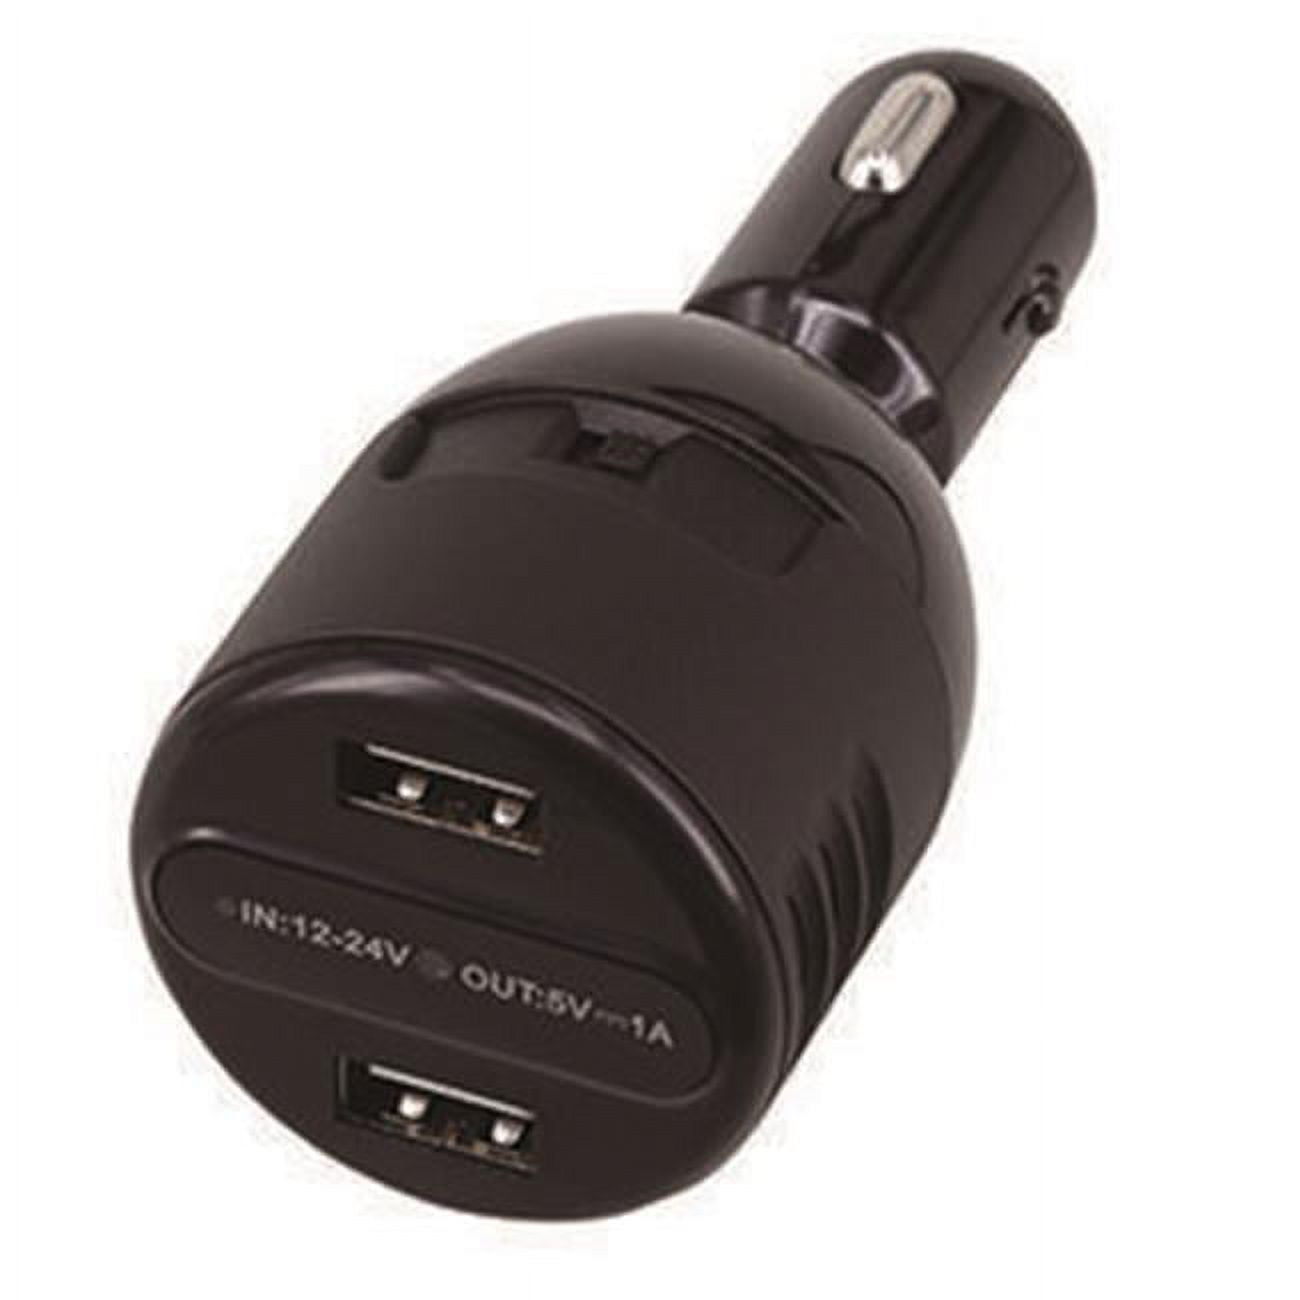 Picture of DLM Electronics PV-CG20 Car Charger Adapter Digital Voice Recorder